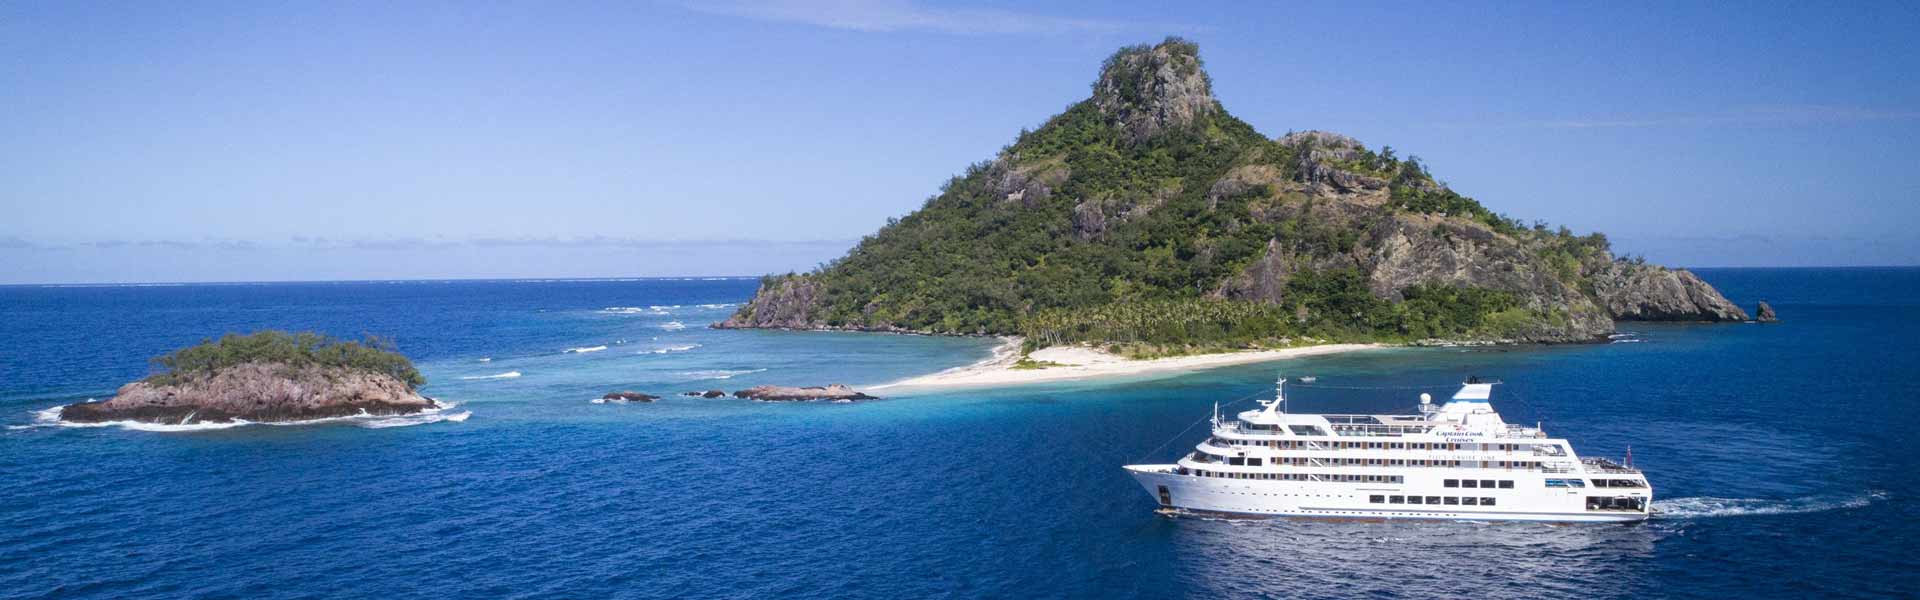 Family Cruise Package for 7 Nights in Mamanuca & Yasawa Islands with Flights, Transfers and More!